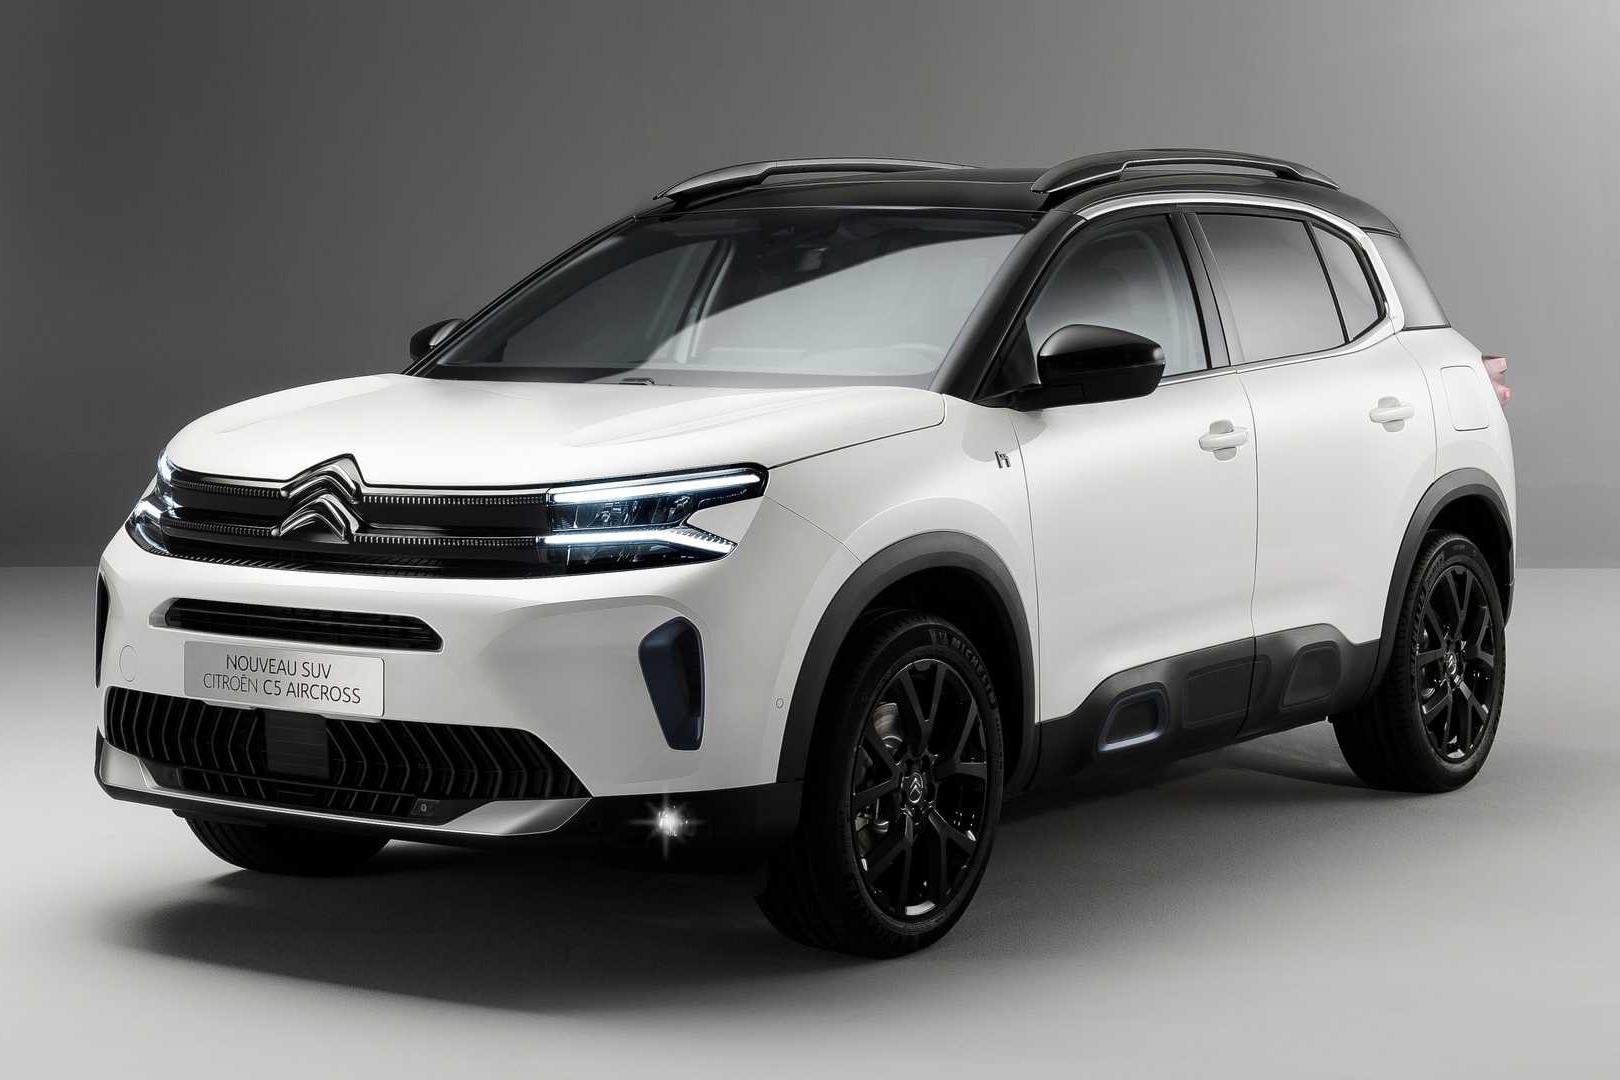 2023 Citroen C5 Aircross facelift due mid-year, price rise expected - Drive